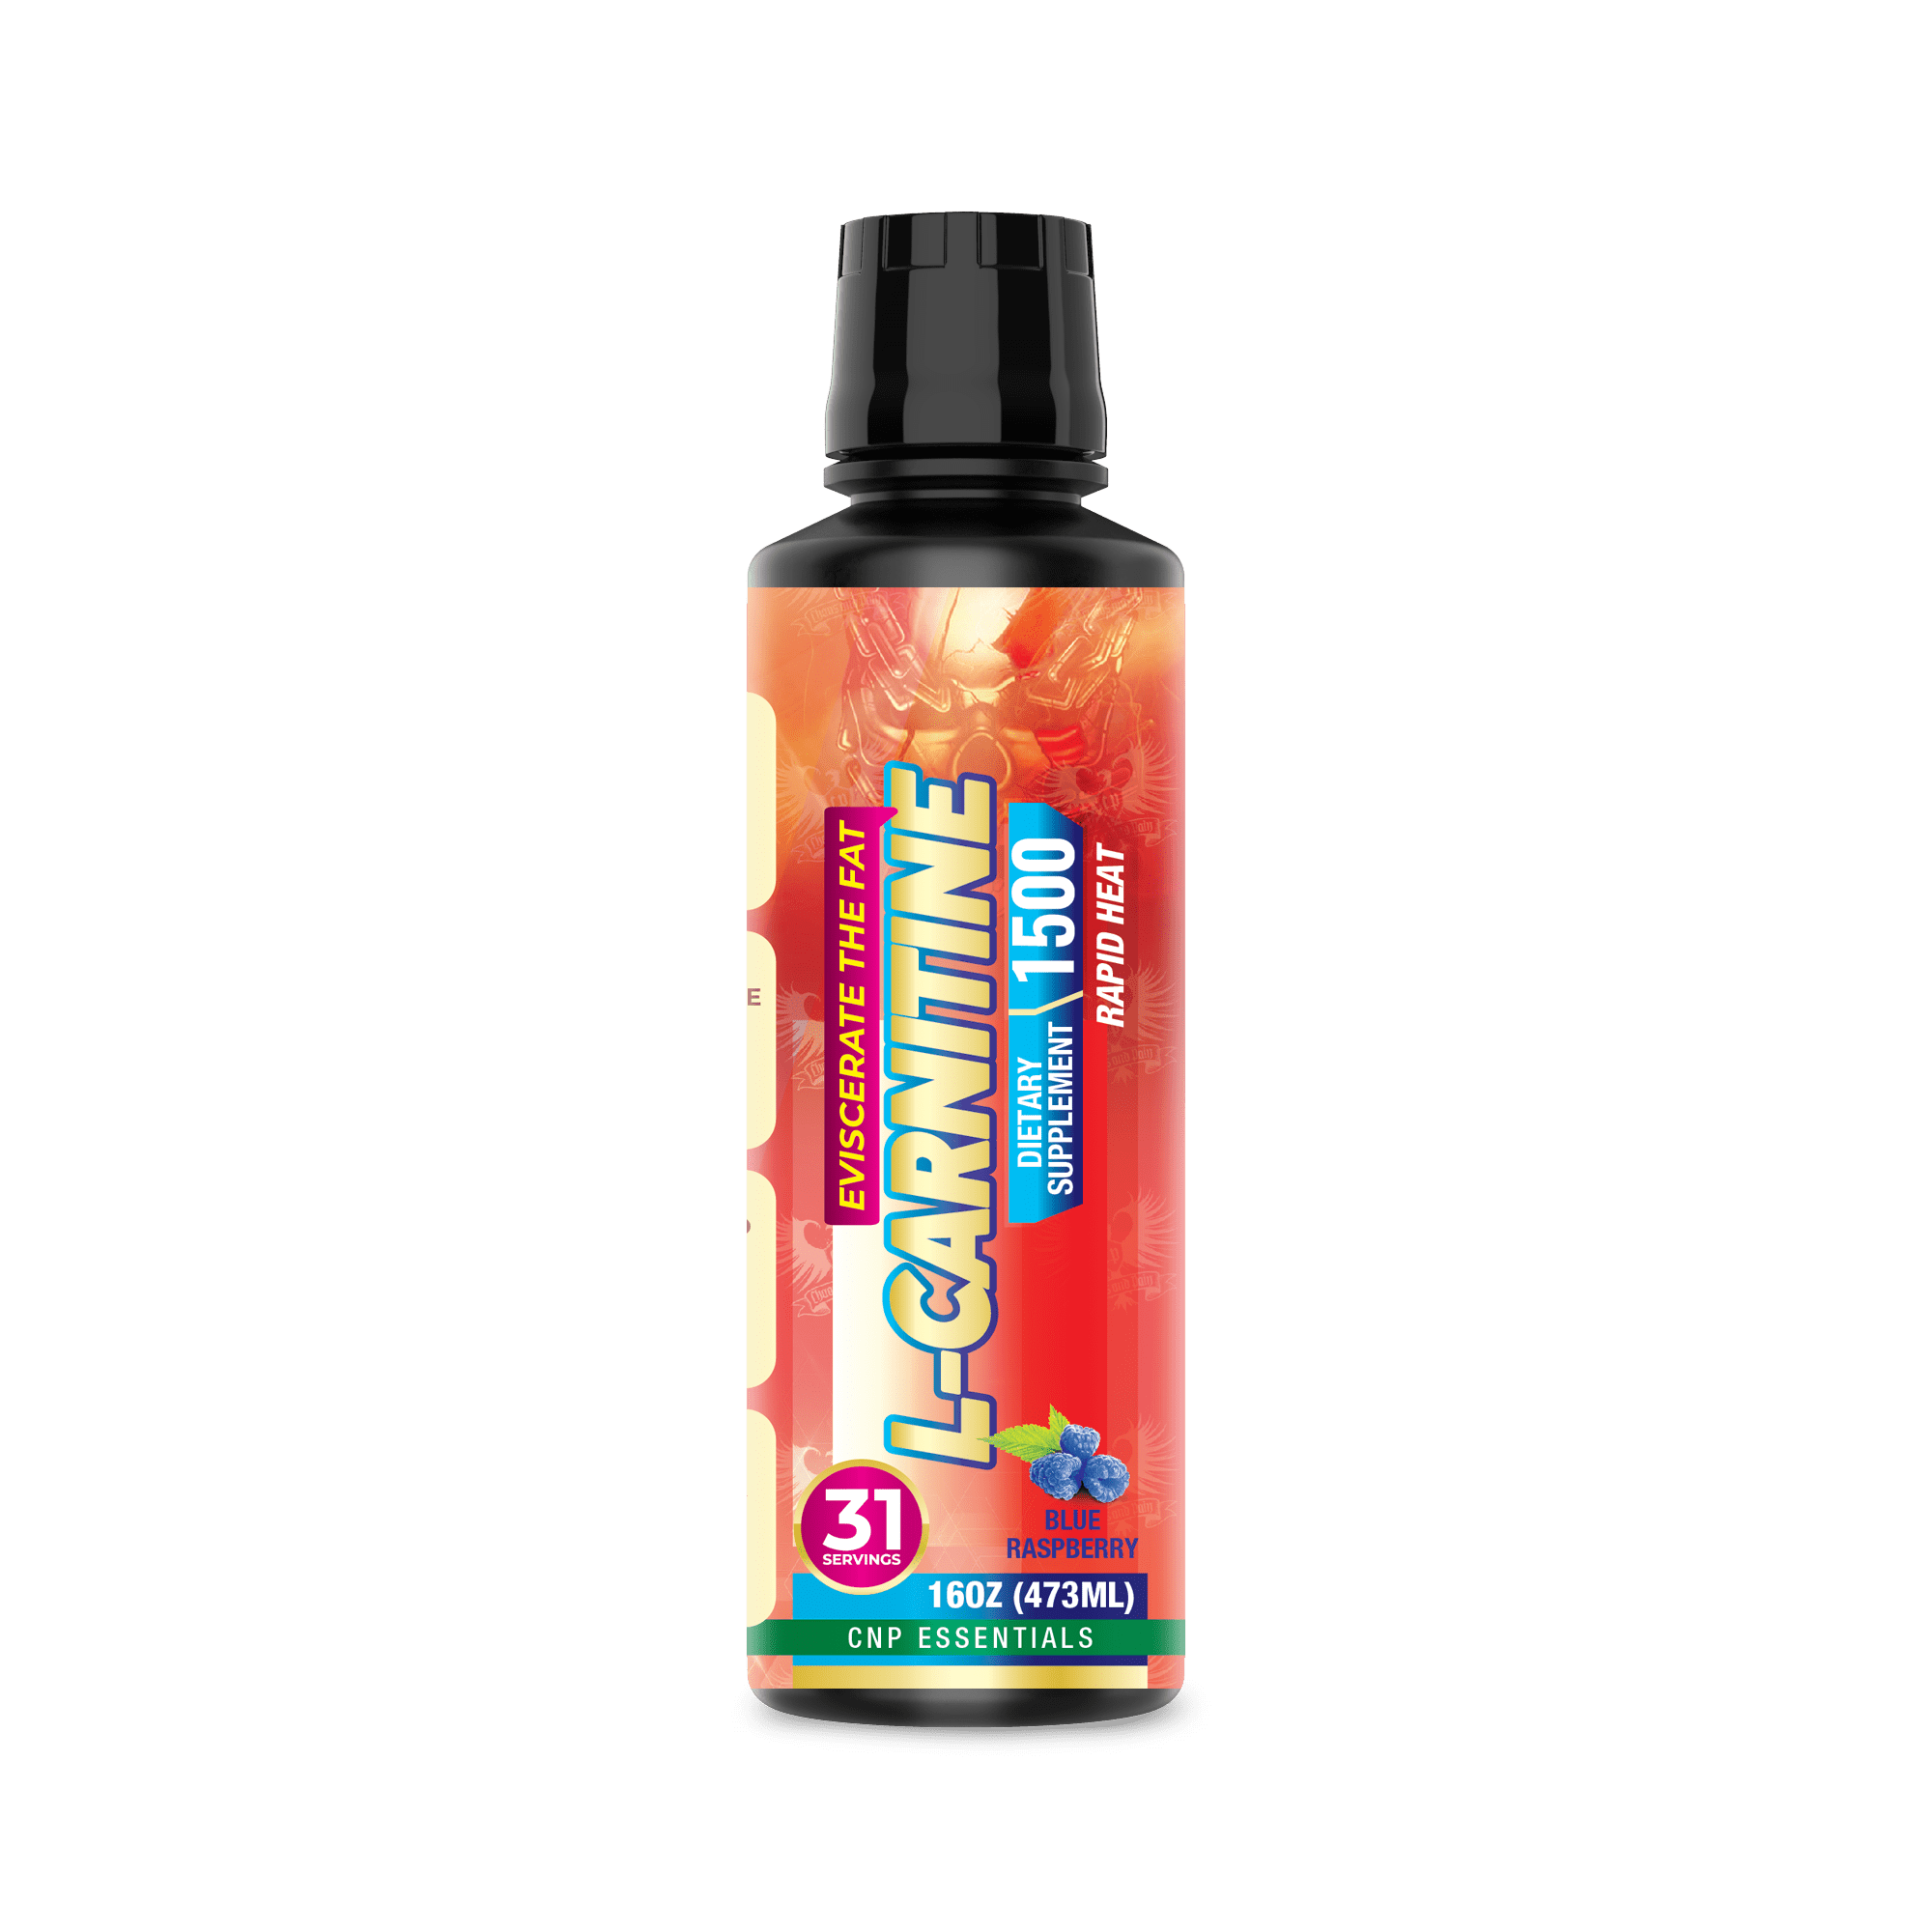 Chaos and Pain L-Carnitine 1500 Rapid Heat